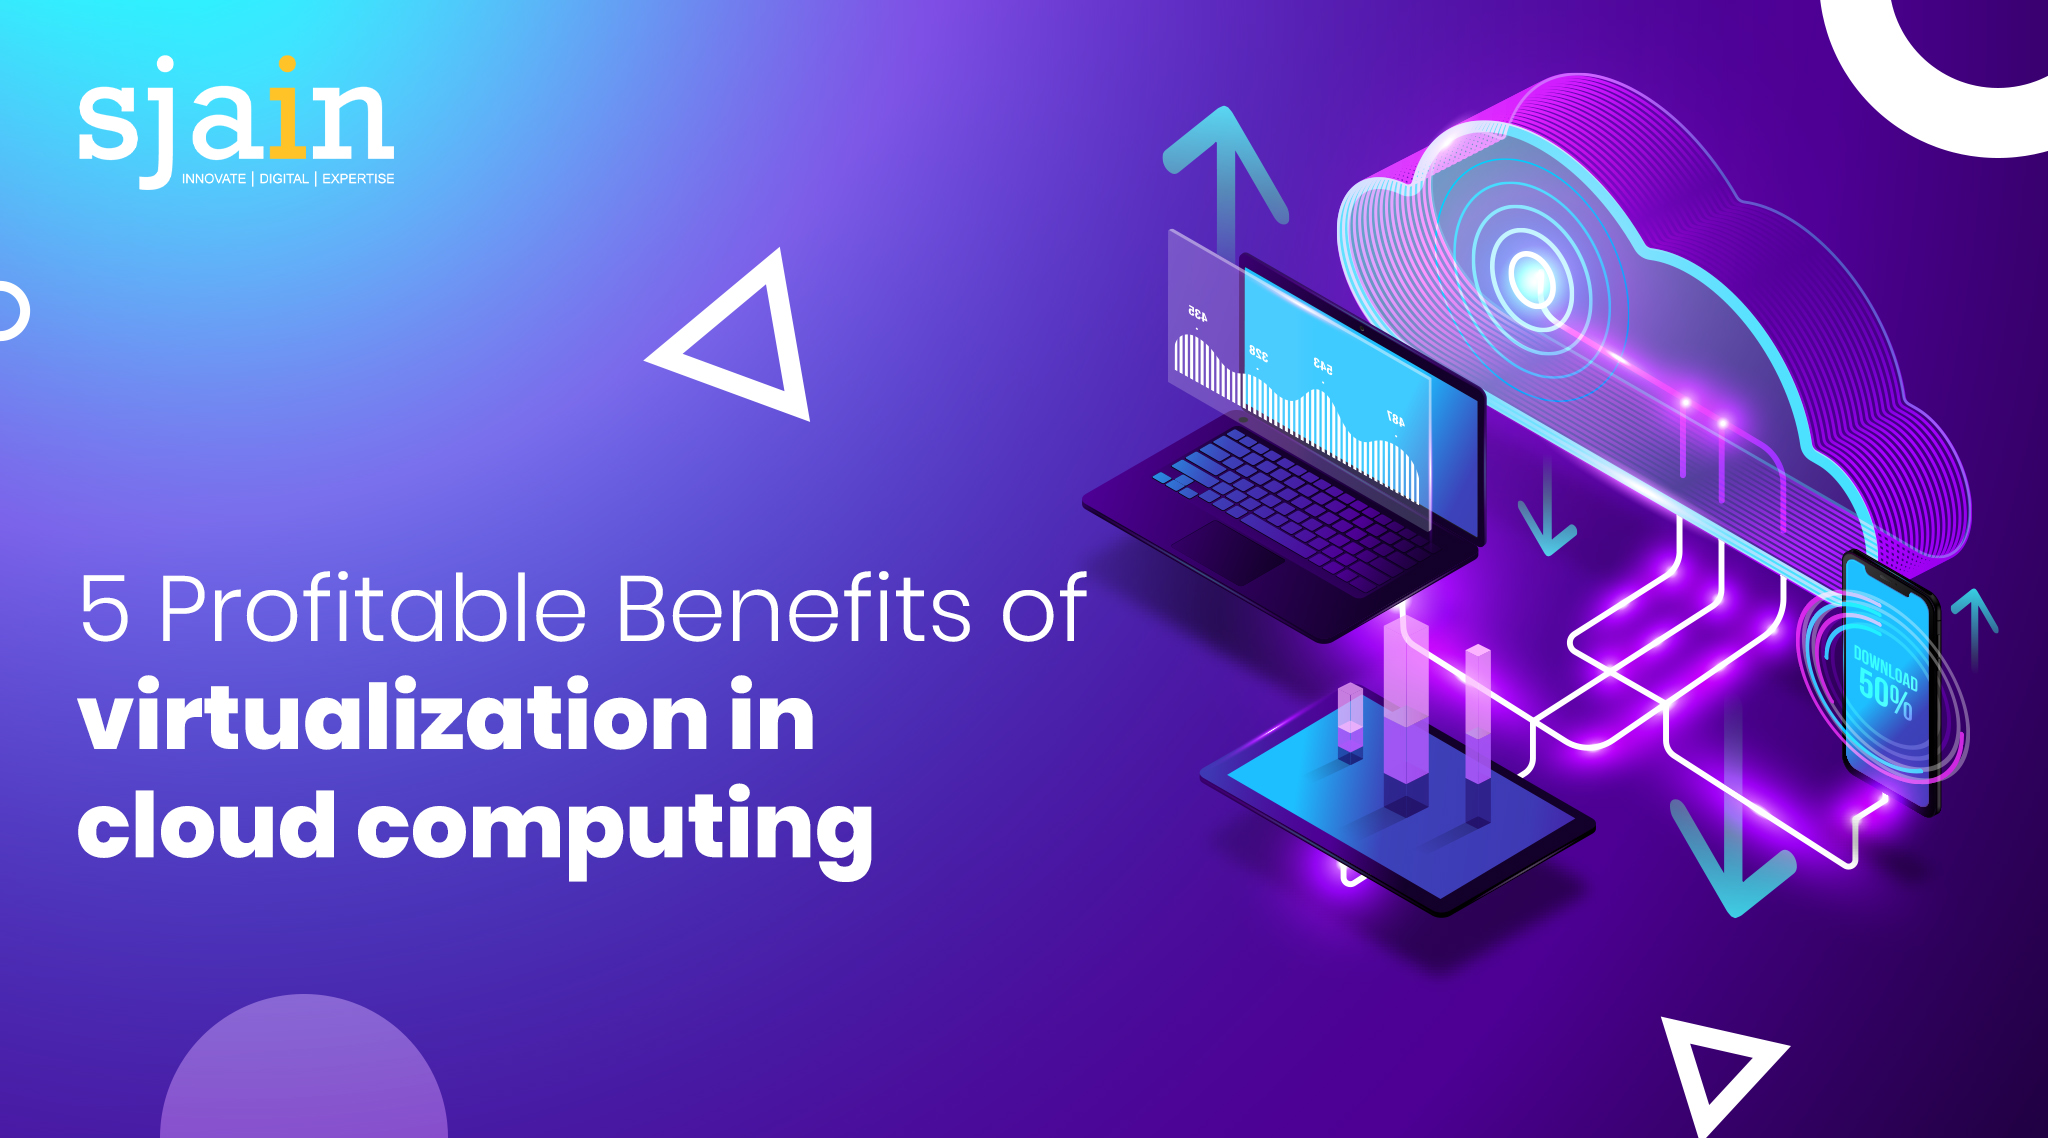 5 Profitable Benefits of Virtualization in Cloud Computing